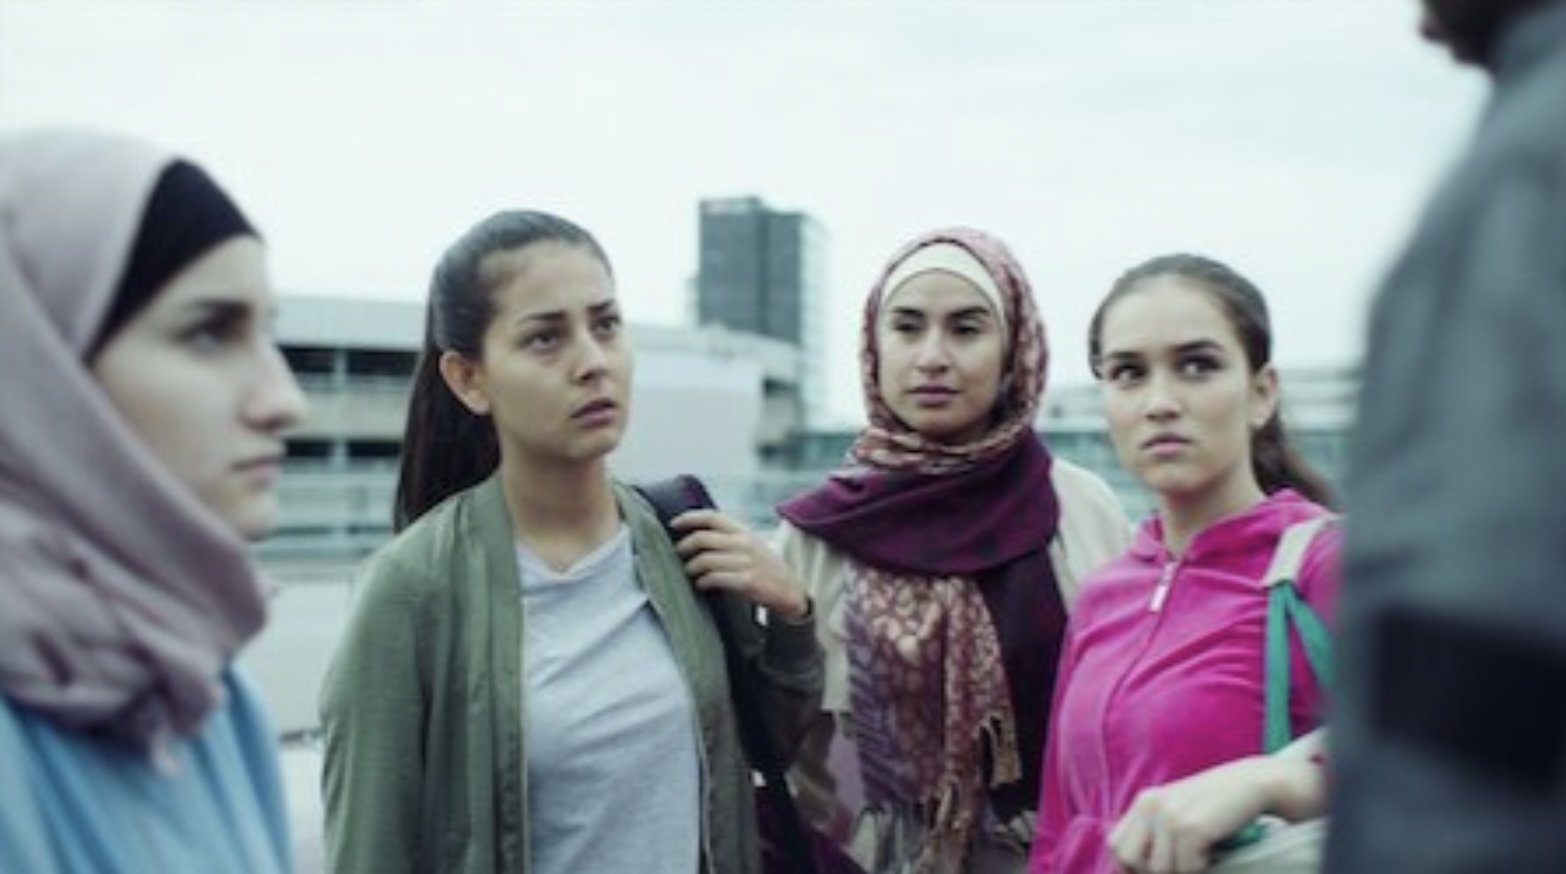 A screengrab from the Swedish TV series, "Caliphate," that revolves around themes such as "extremism," terrorism and women's rights.